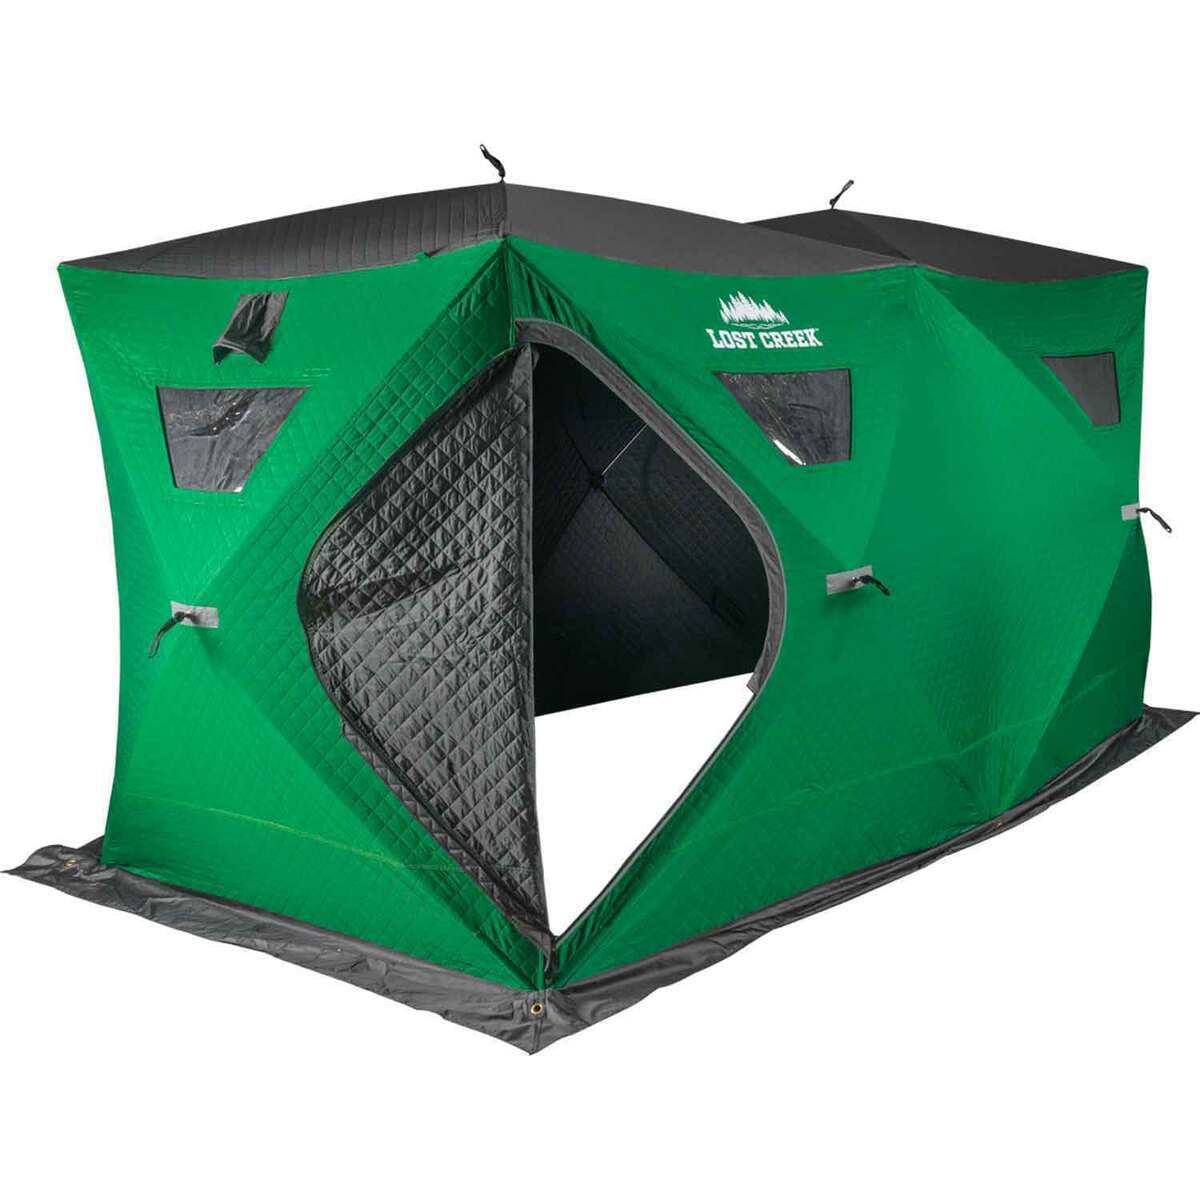 Lost Creek 3 Person Insulated Ice Fishing Shelter - Green/Black/Silver by Sportsman's Warehouse